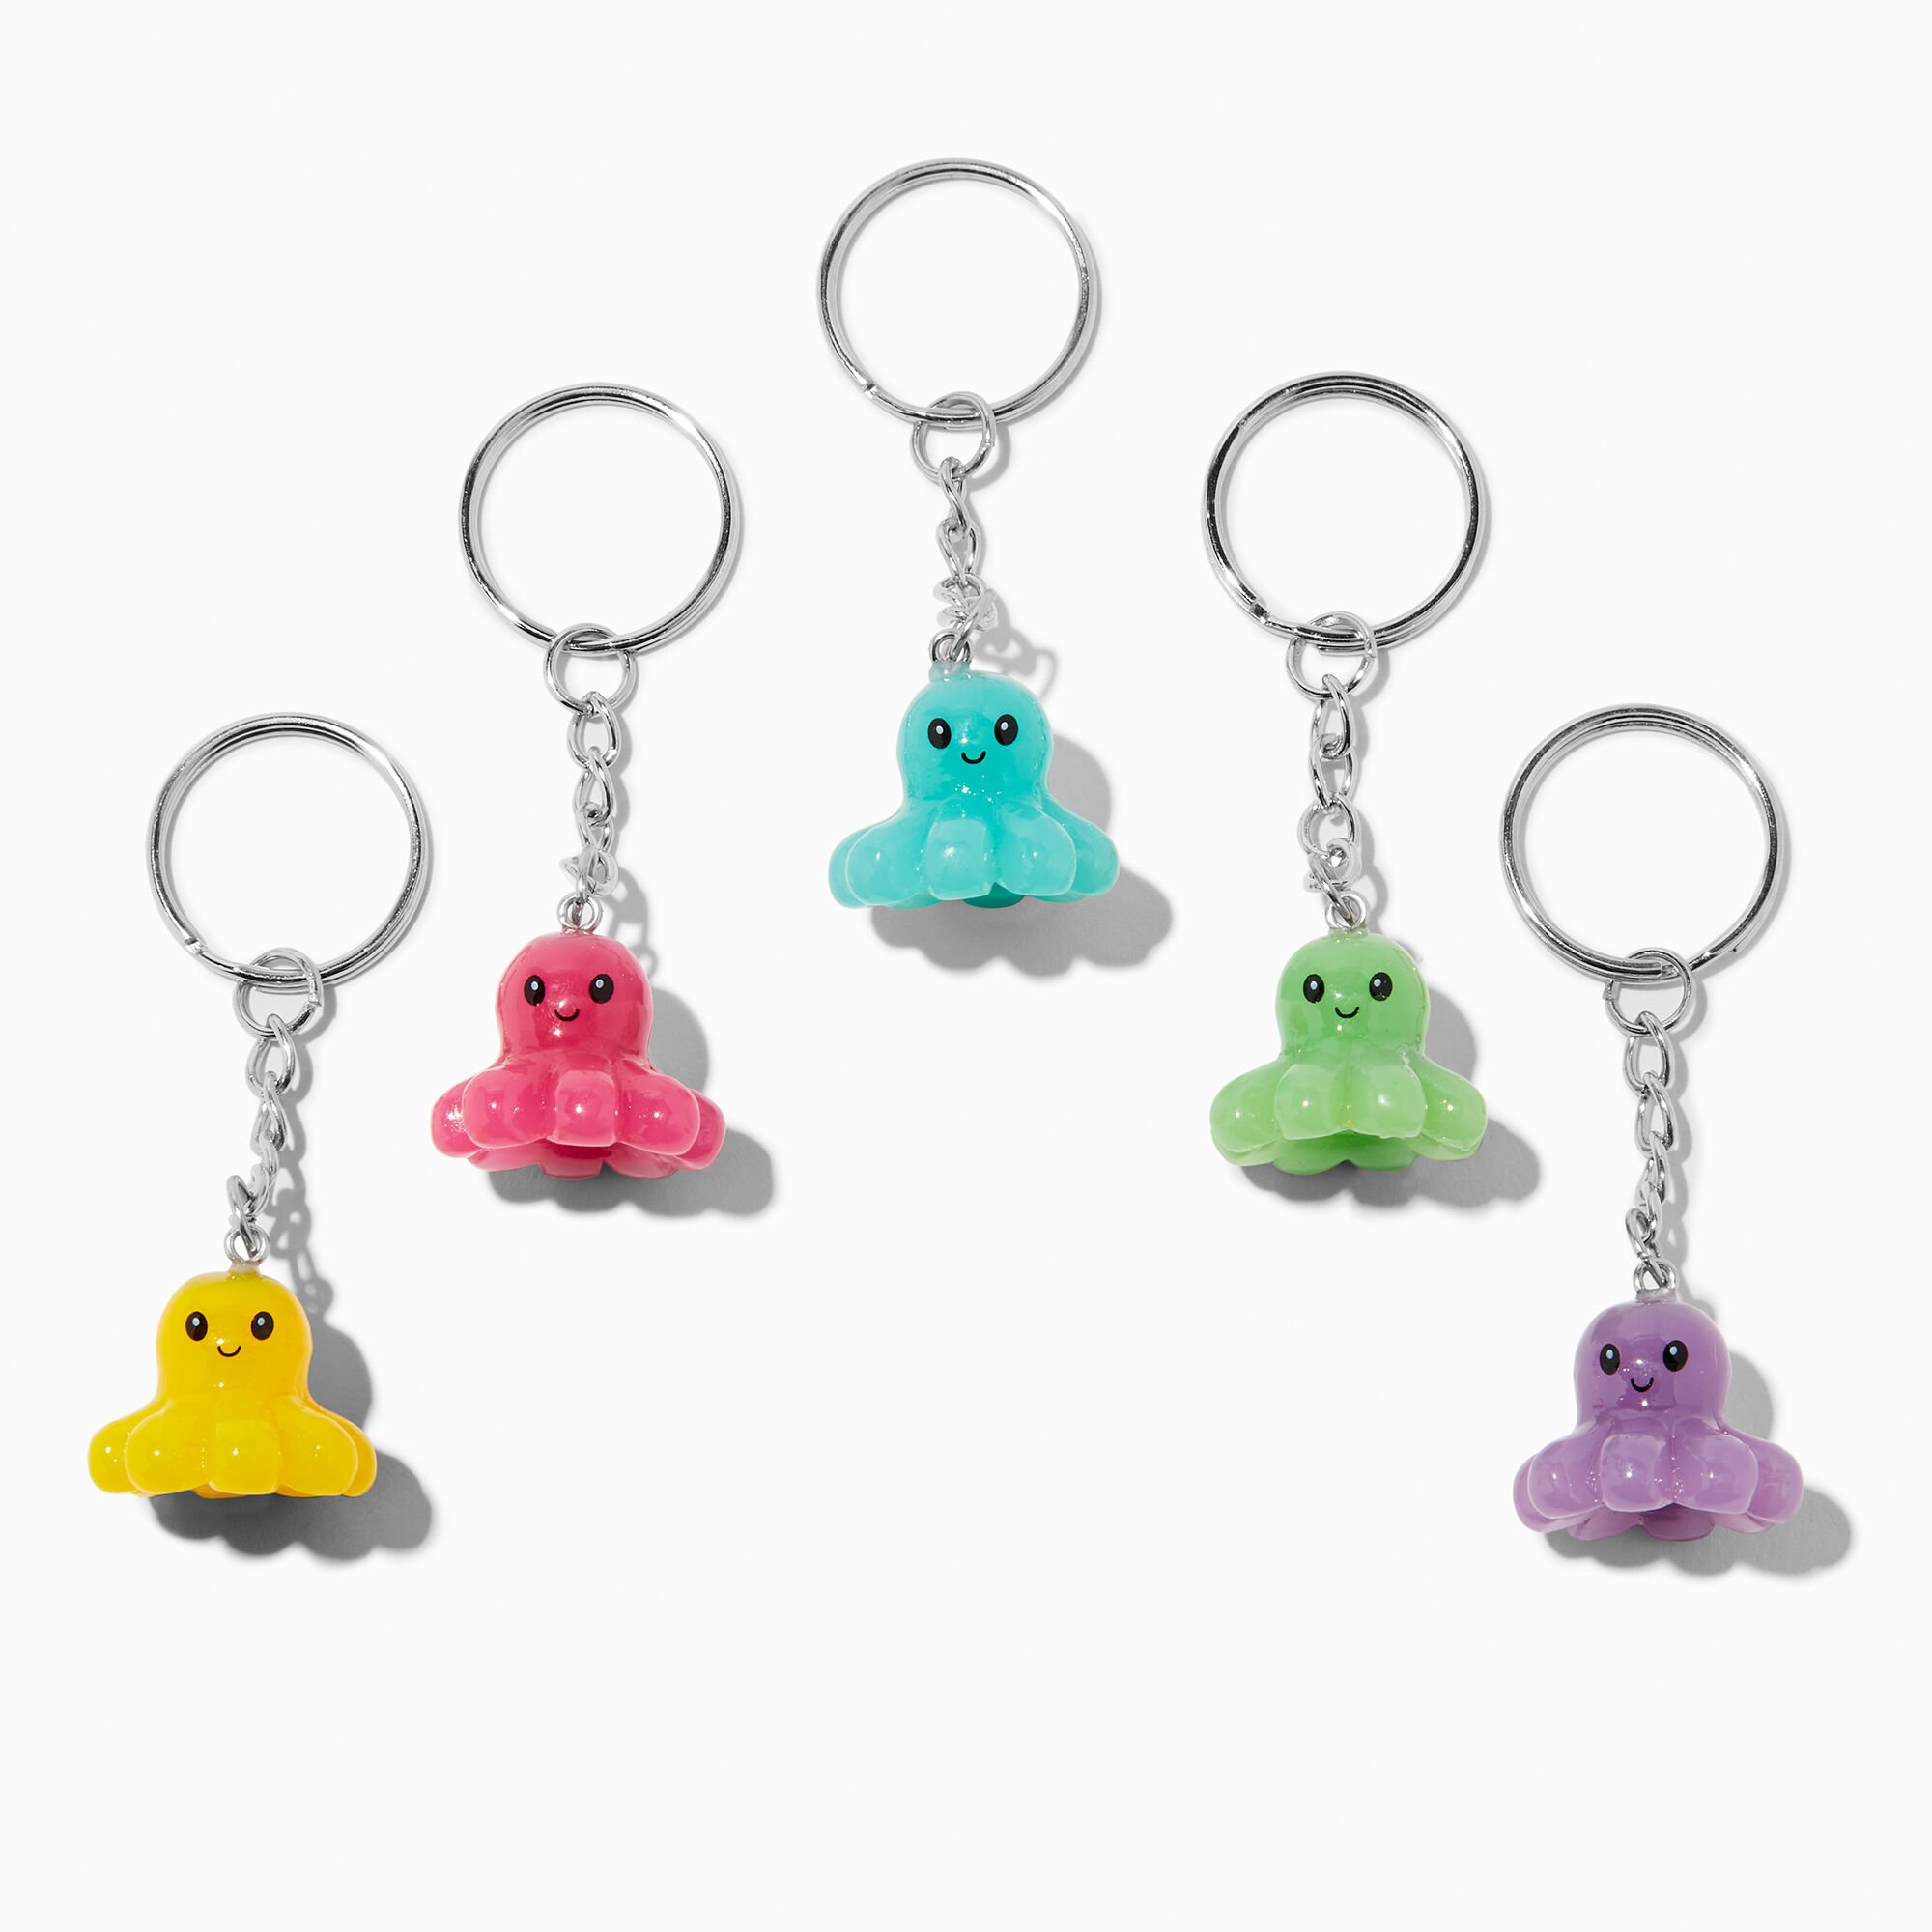 Dress Up Fruit Critters Best Friends Keychains - 5 Pack